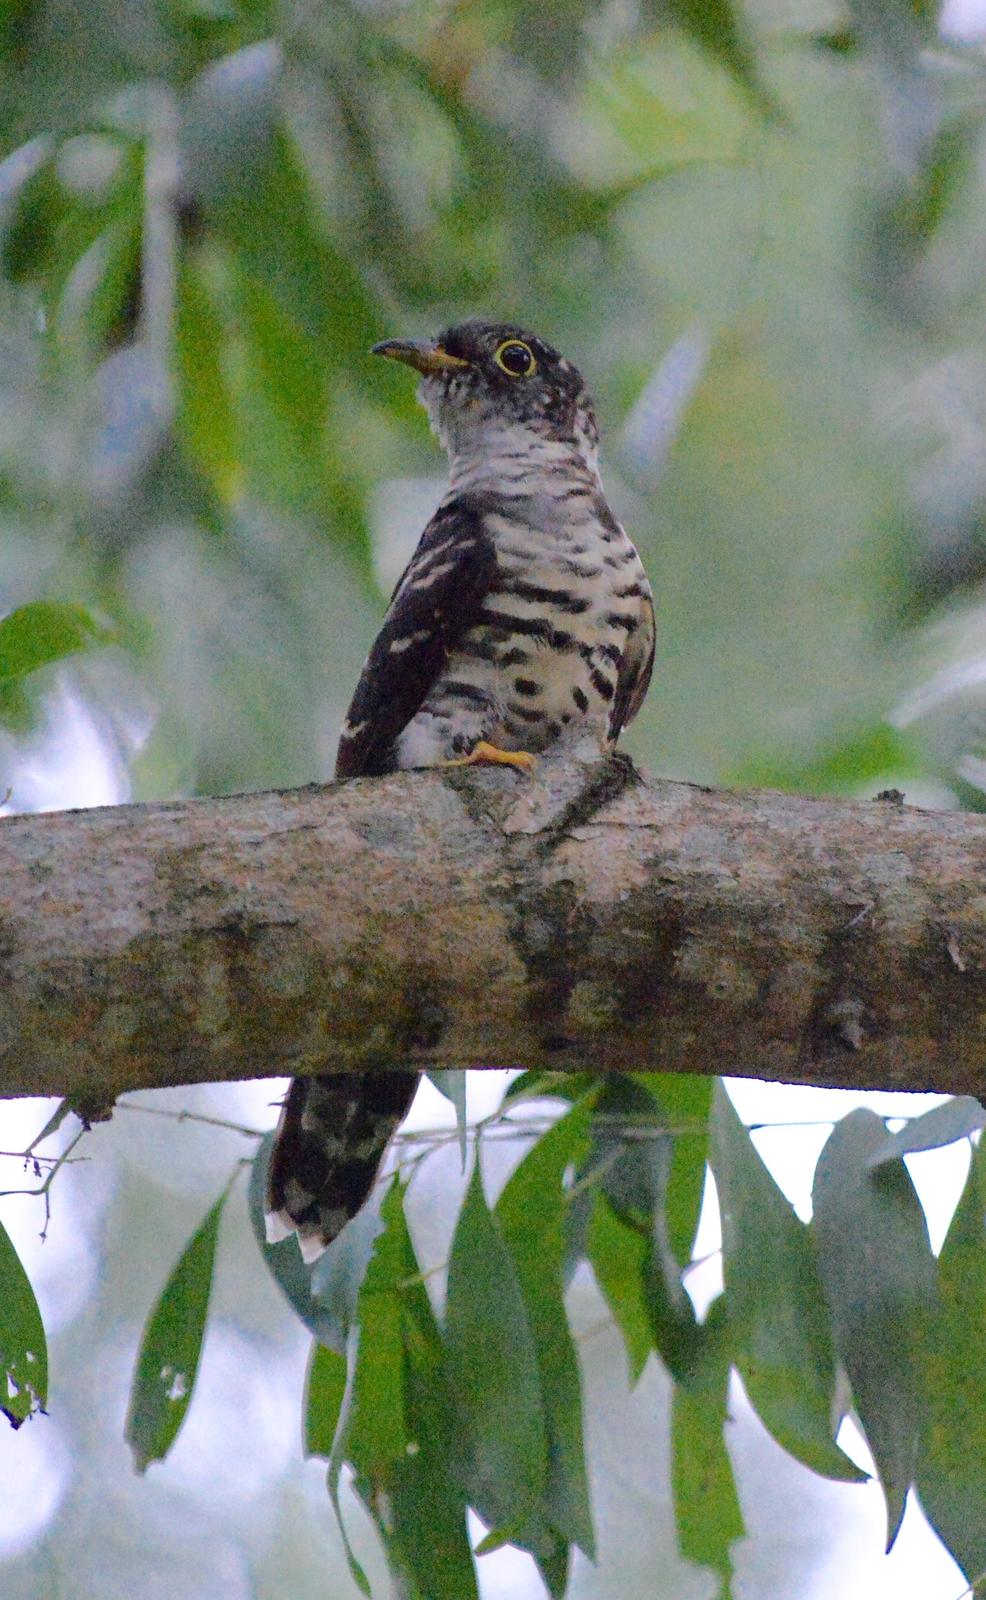 Indian Cuckoo Photo by marcel finlay